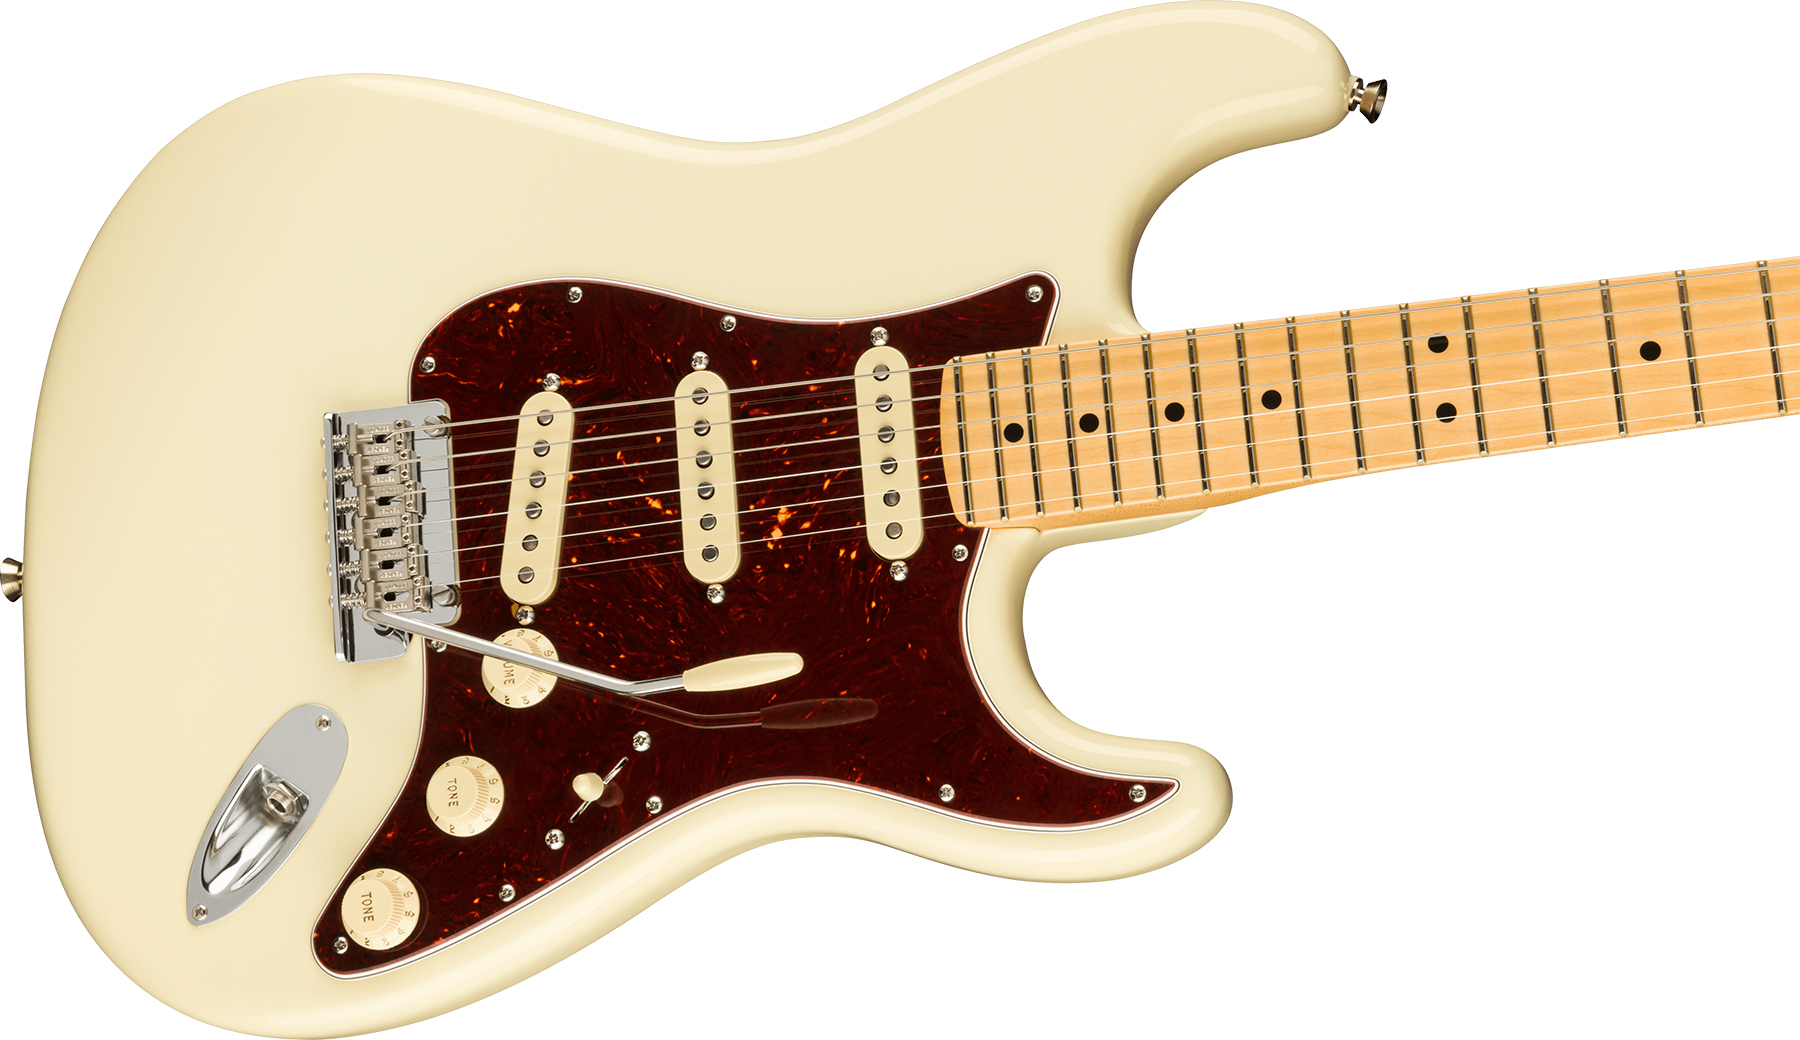 Fender Strat American Professional Ii Usa Mn - Olympic White - Str shape electric guitar - Variation 2